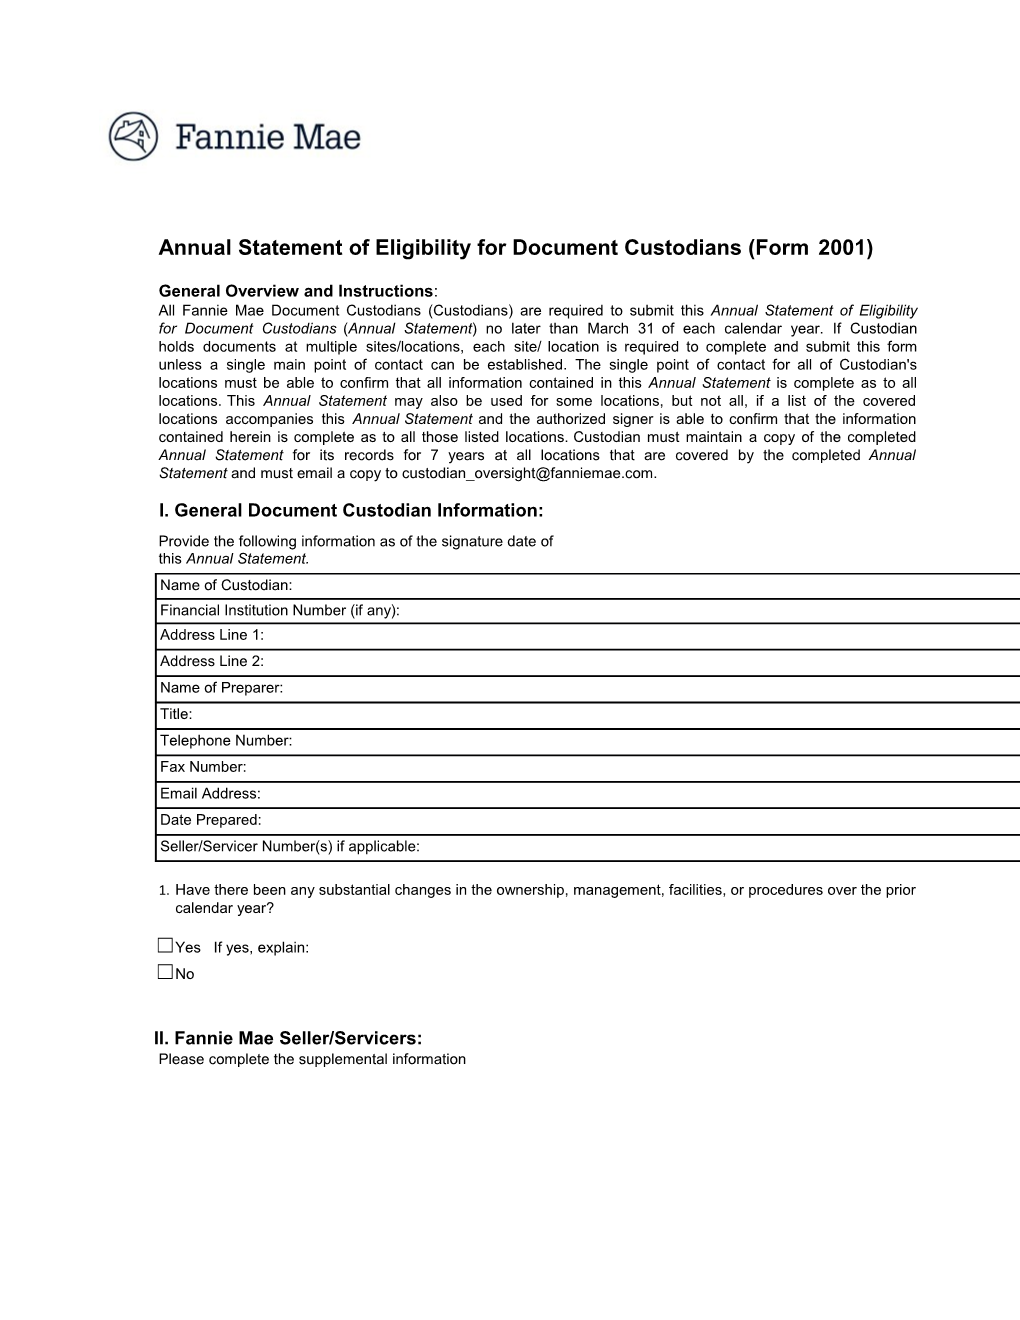 Annual Statement of Eligibility for Document Custodians (Form 2001)